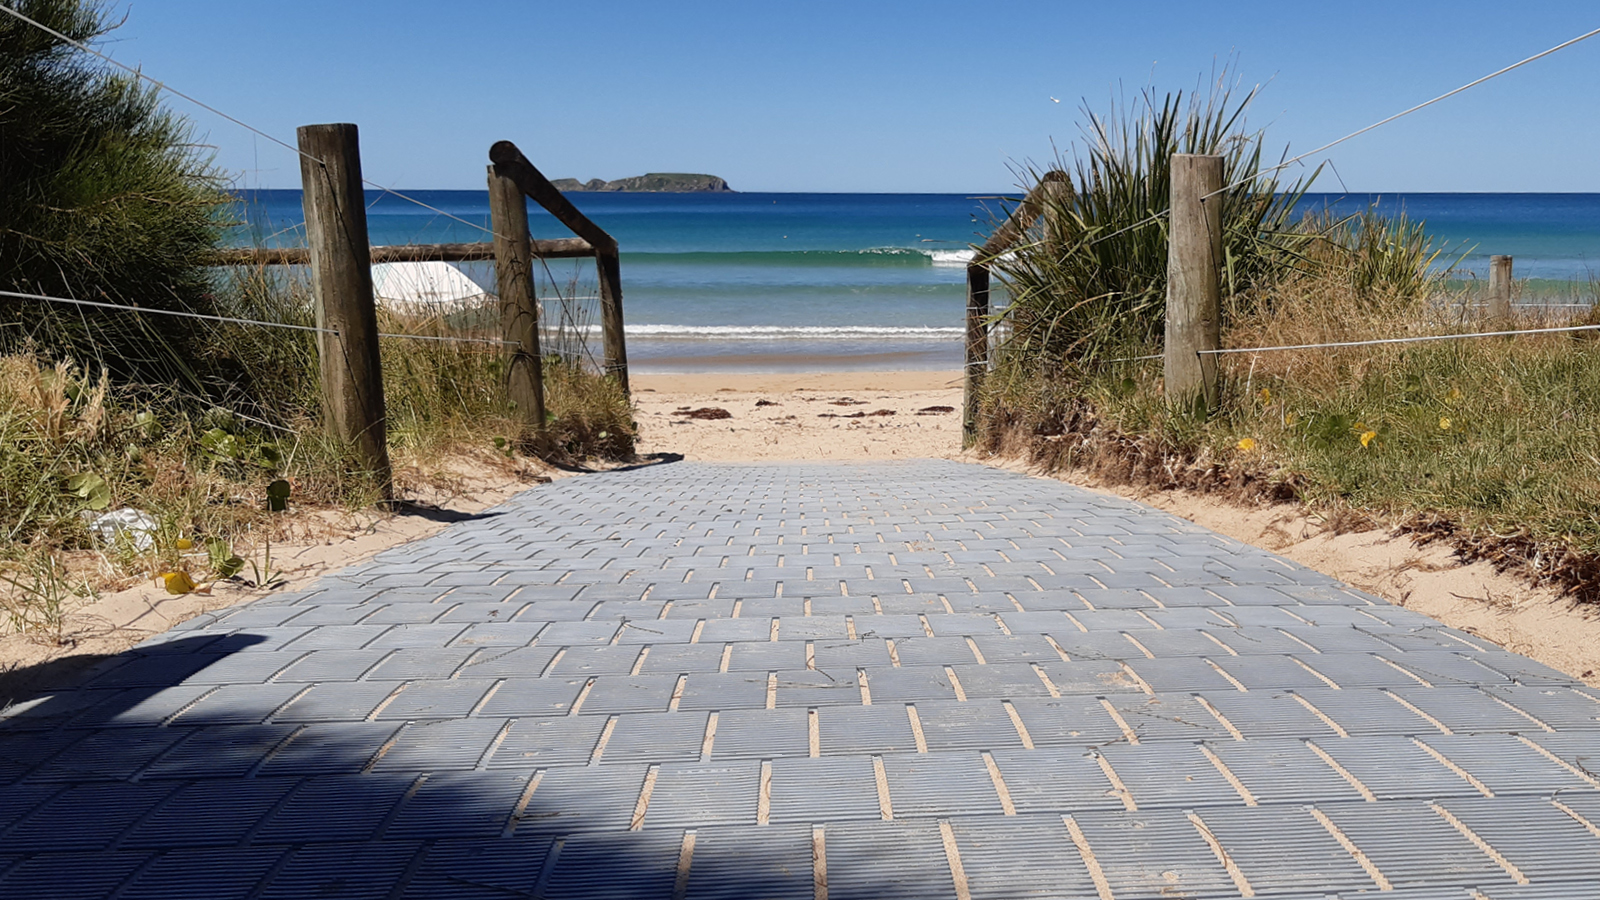 Image Photo of the completed lead-in path to mobility mat at Surf Beach.